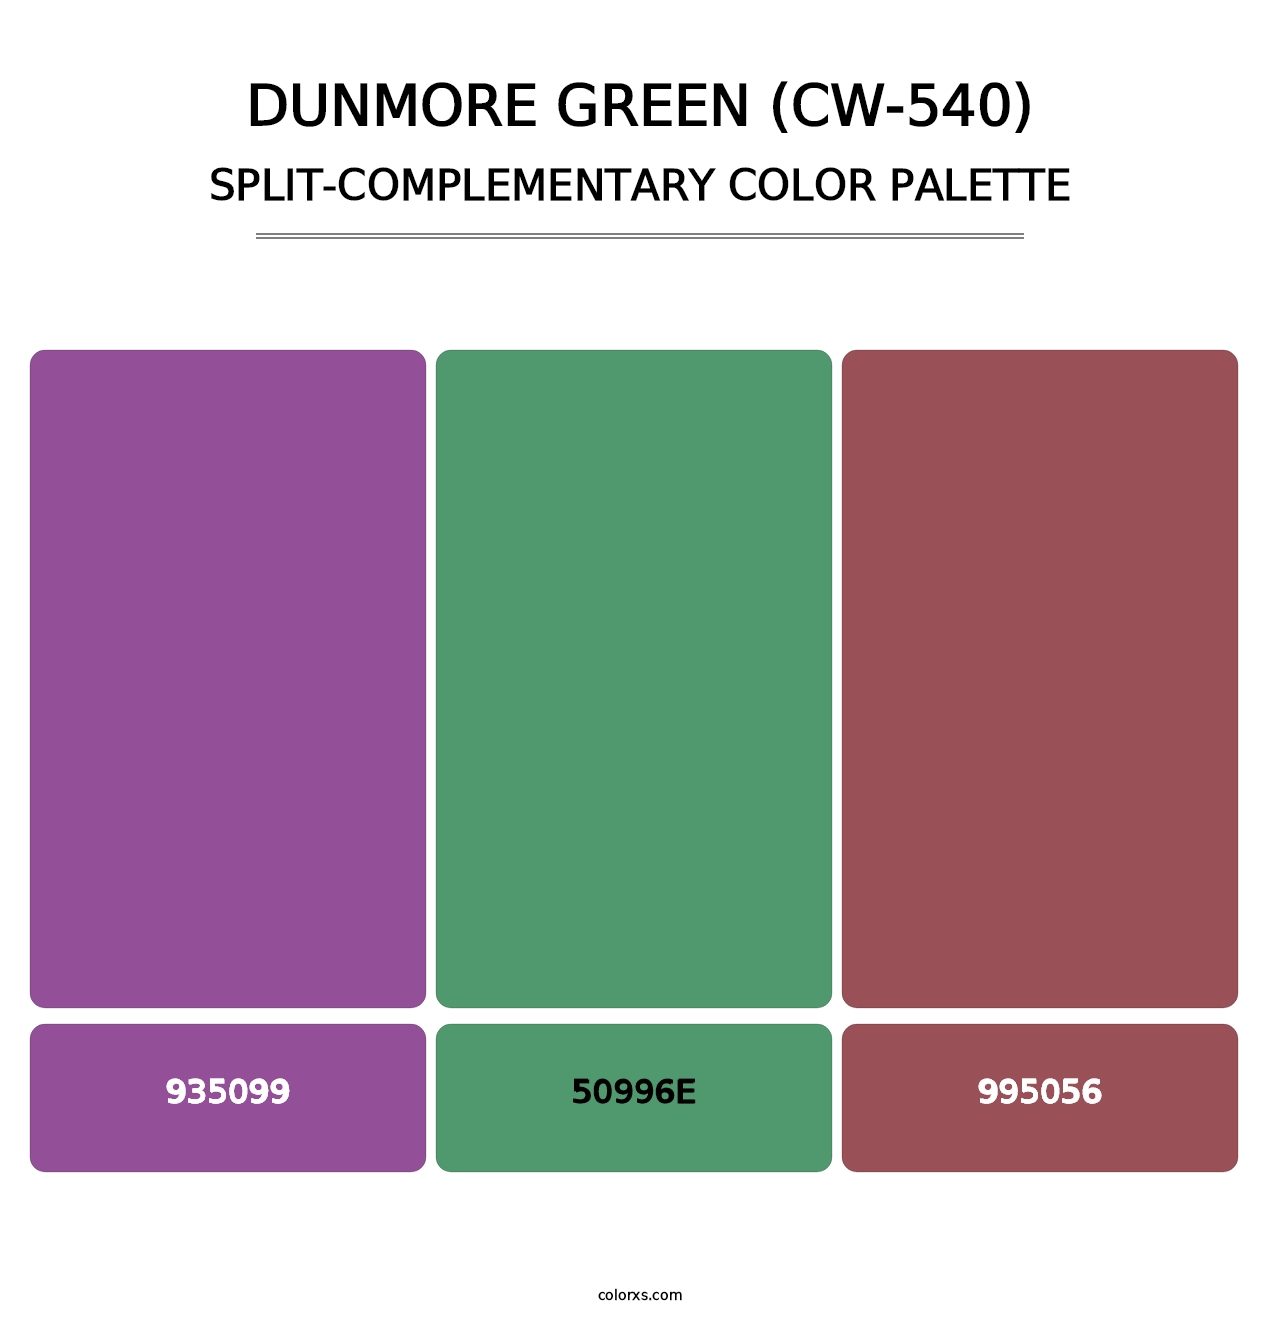 Dunmore Green (CW-540) - Split-Complementary Color Palette